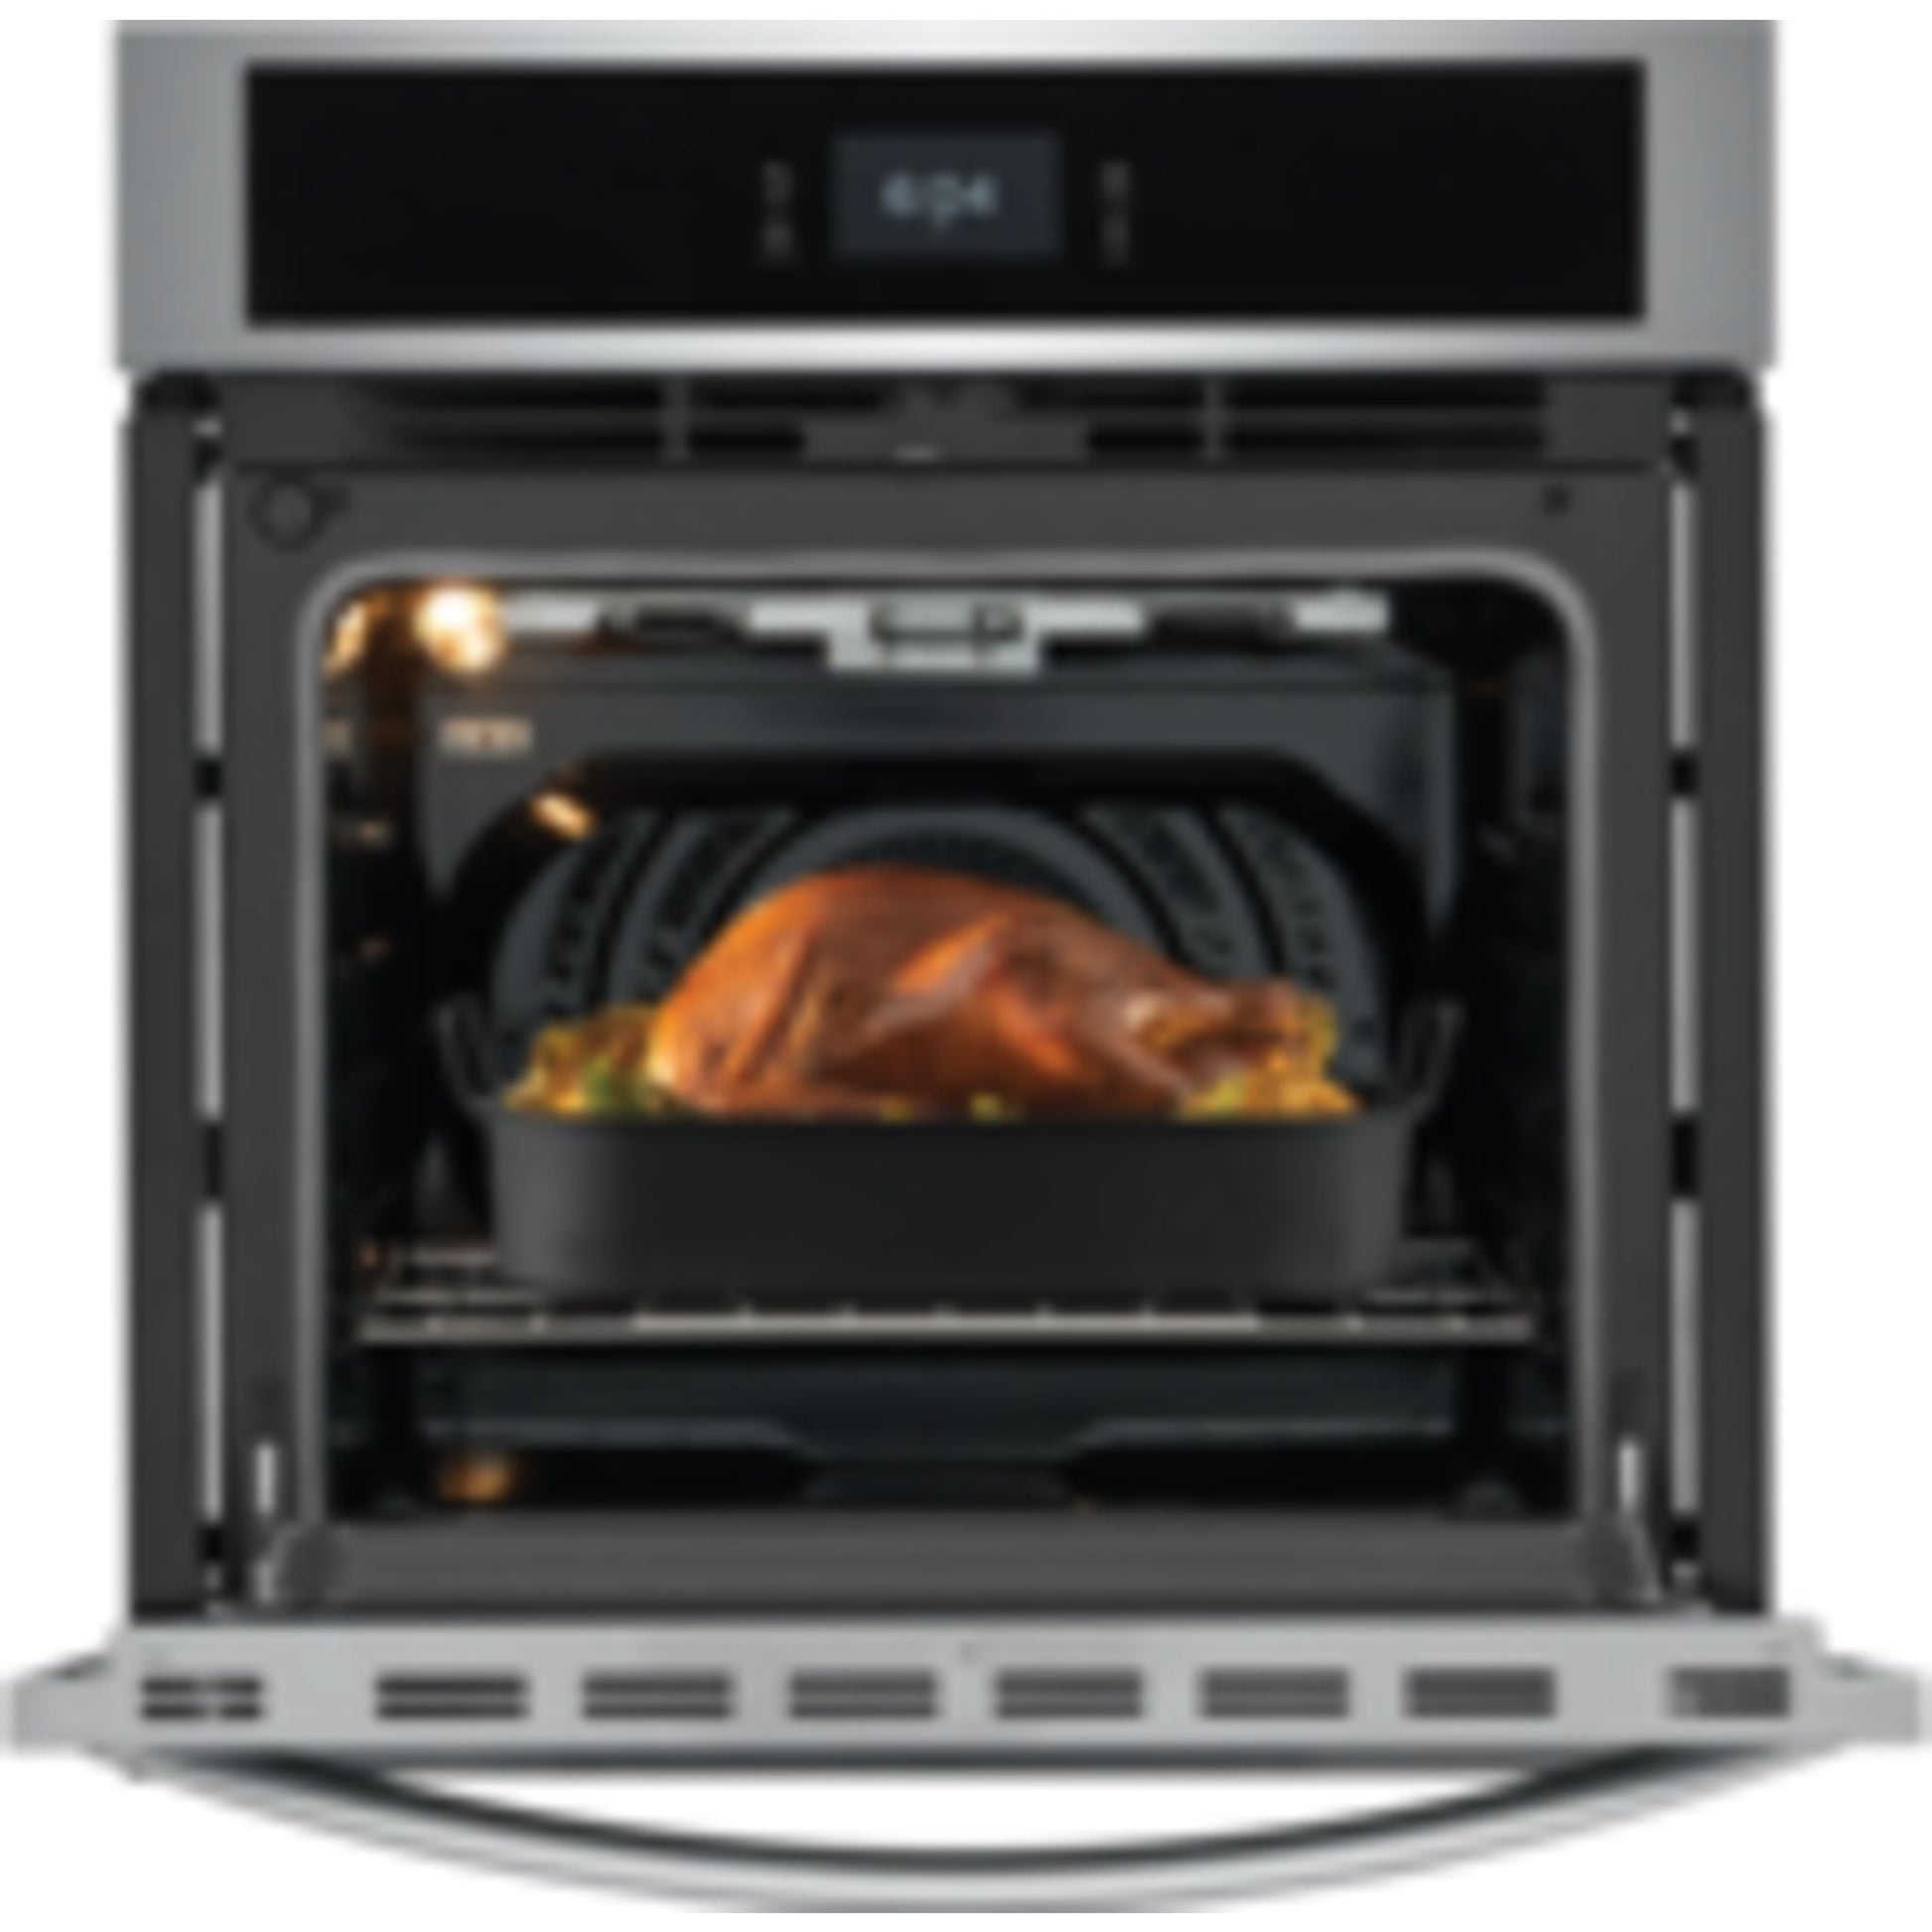 Frigidaire 27" Convection Wall Oven (FCWS2727AS) - Stainless